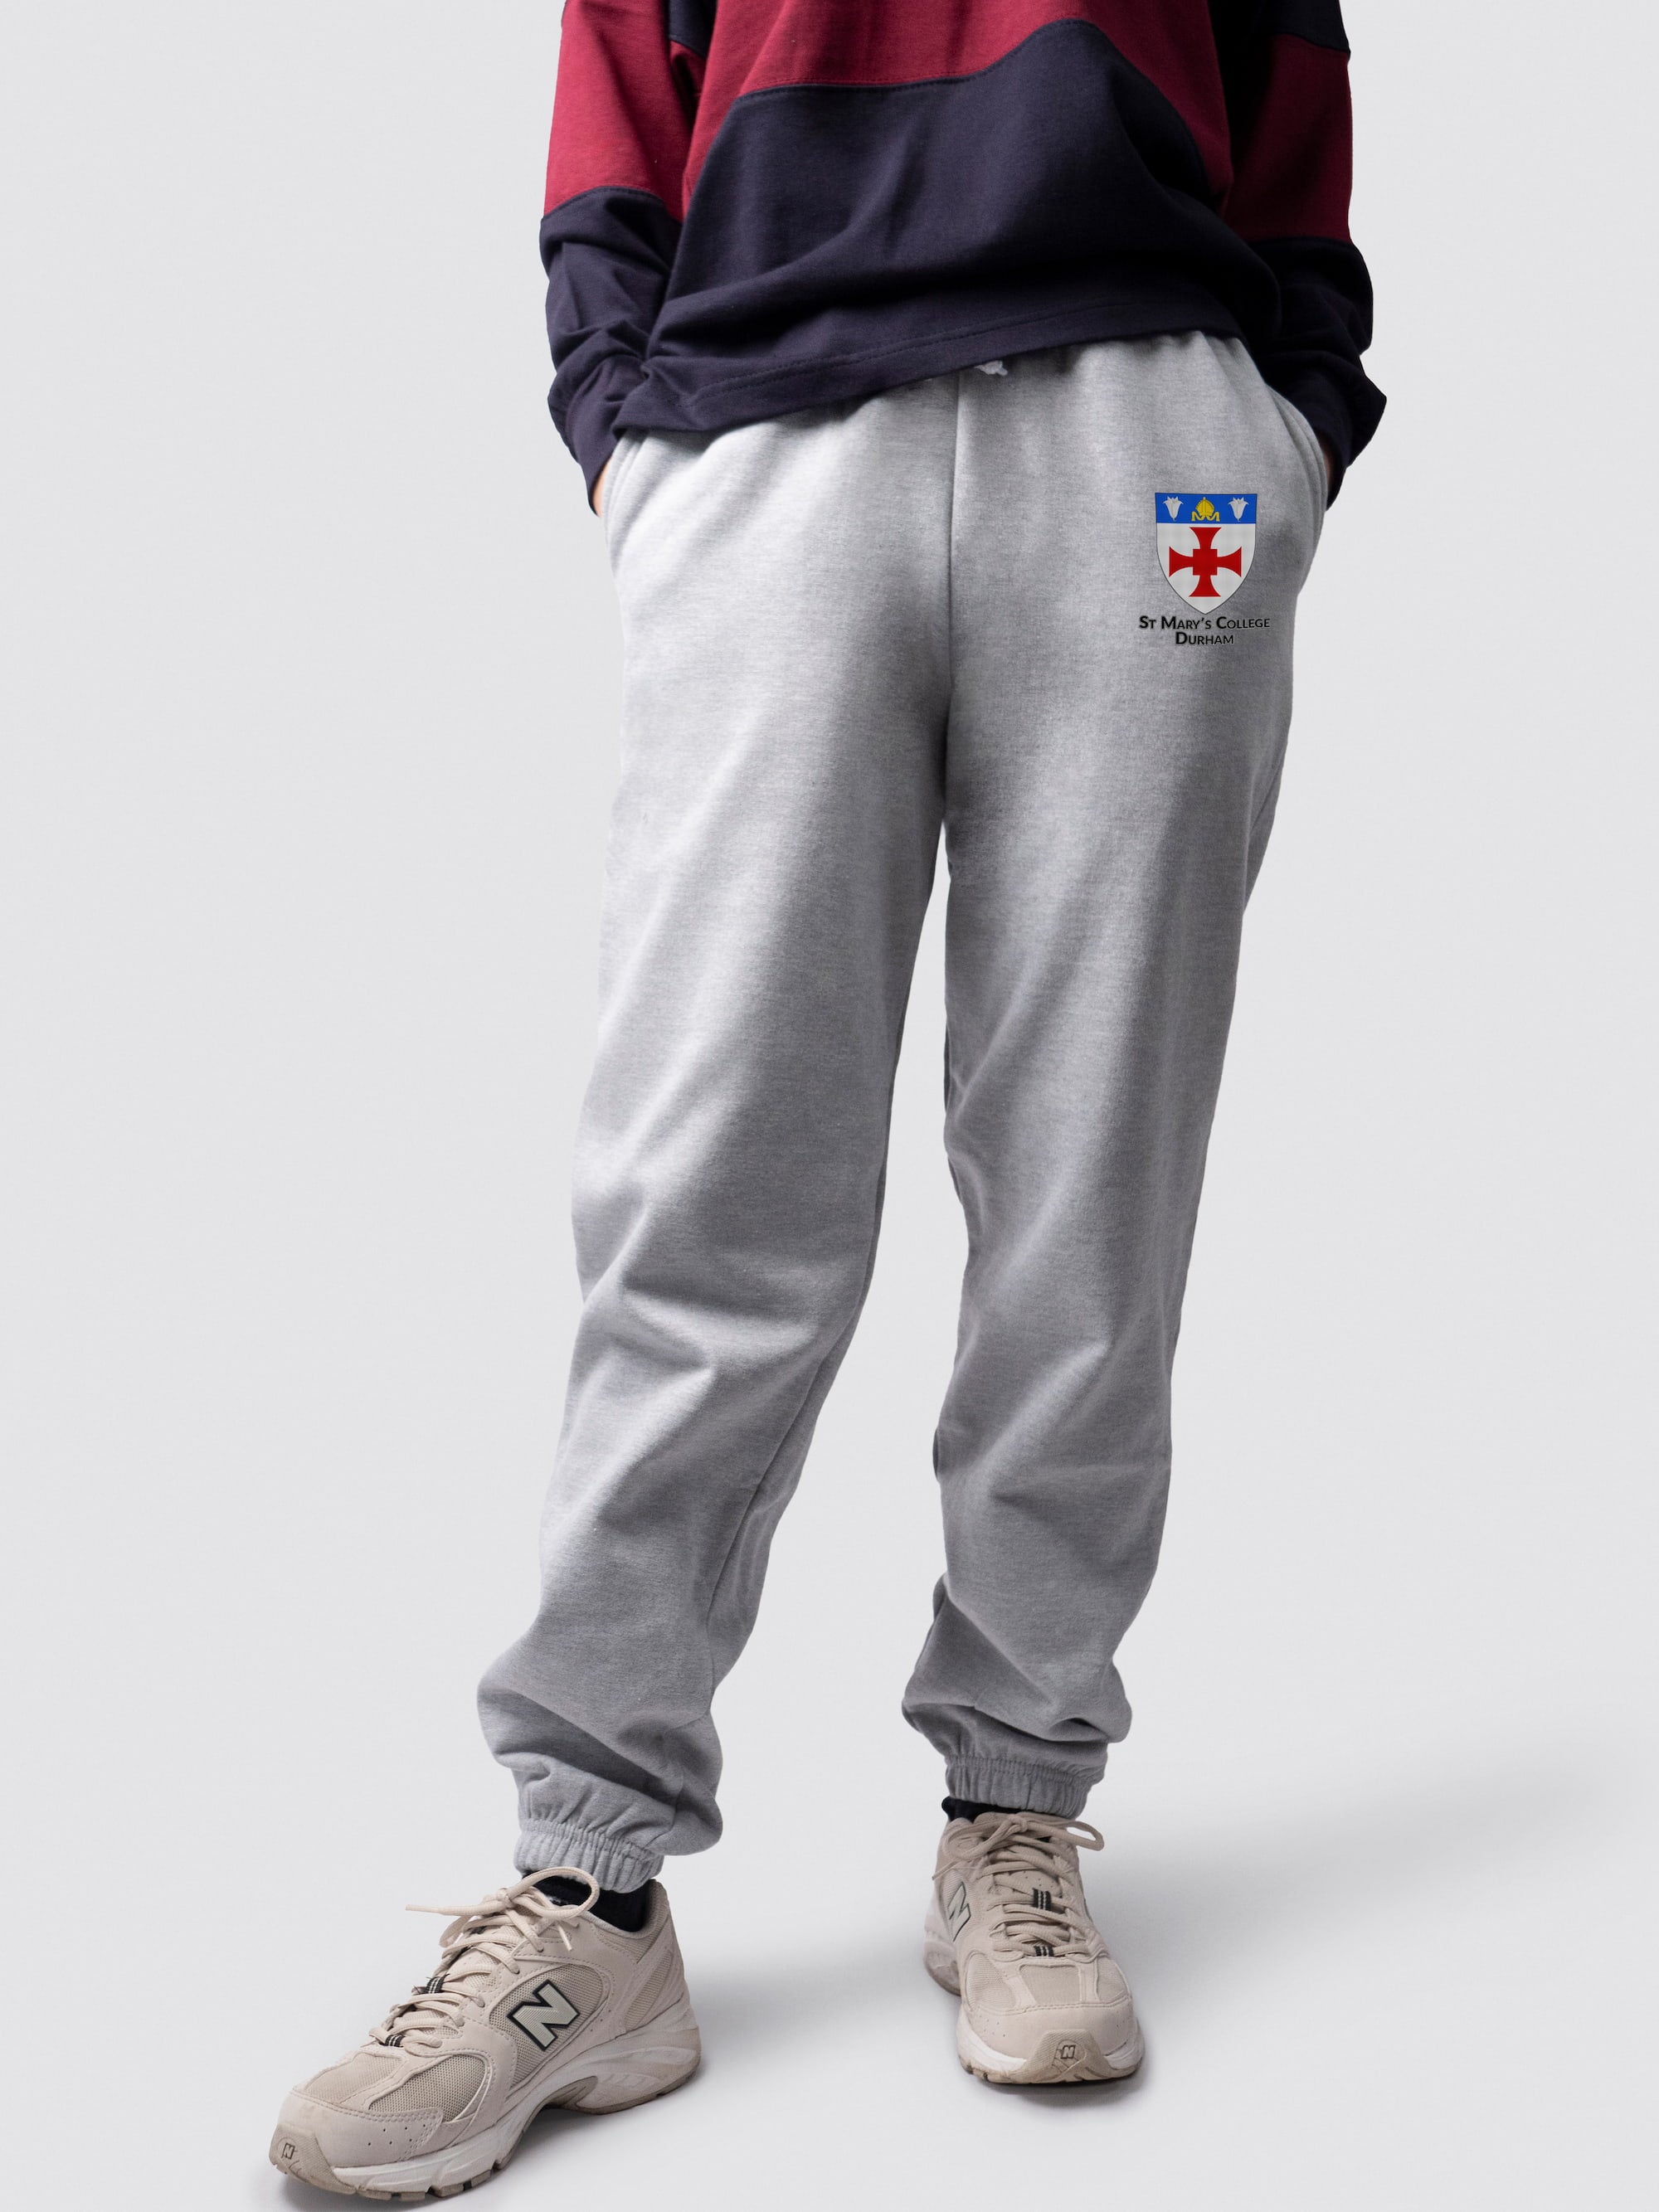 undergraduate cuffed sweatpants, made from soft cotton fabric, with St Mary's logo